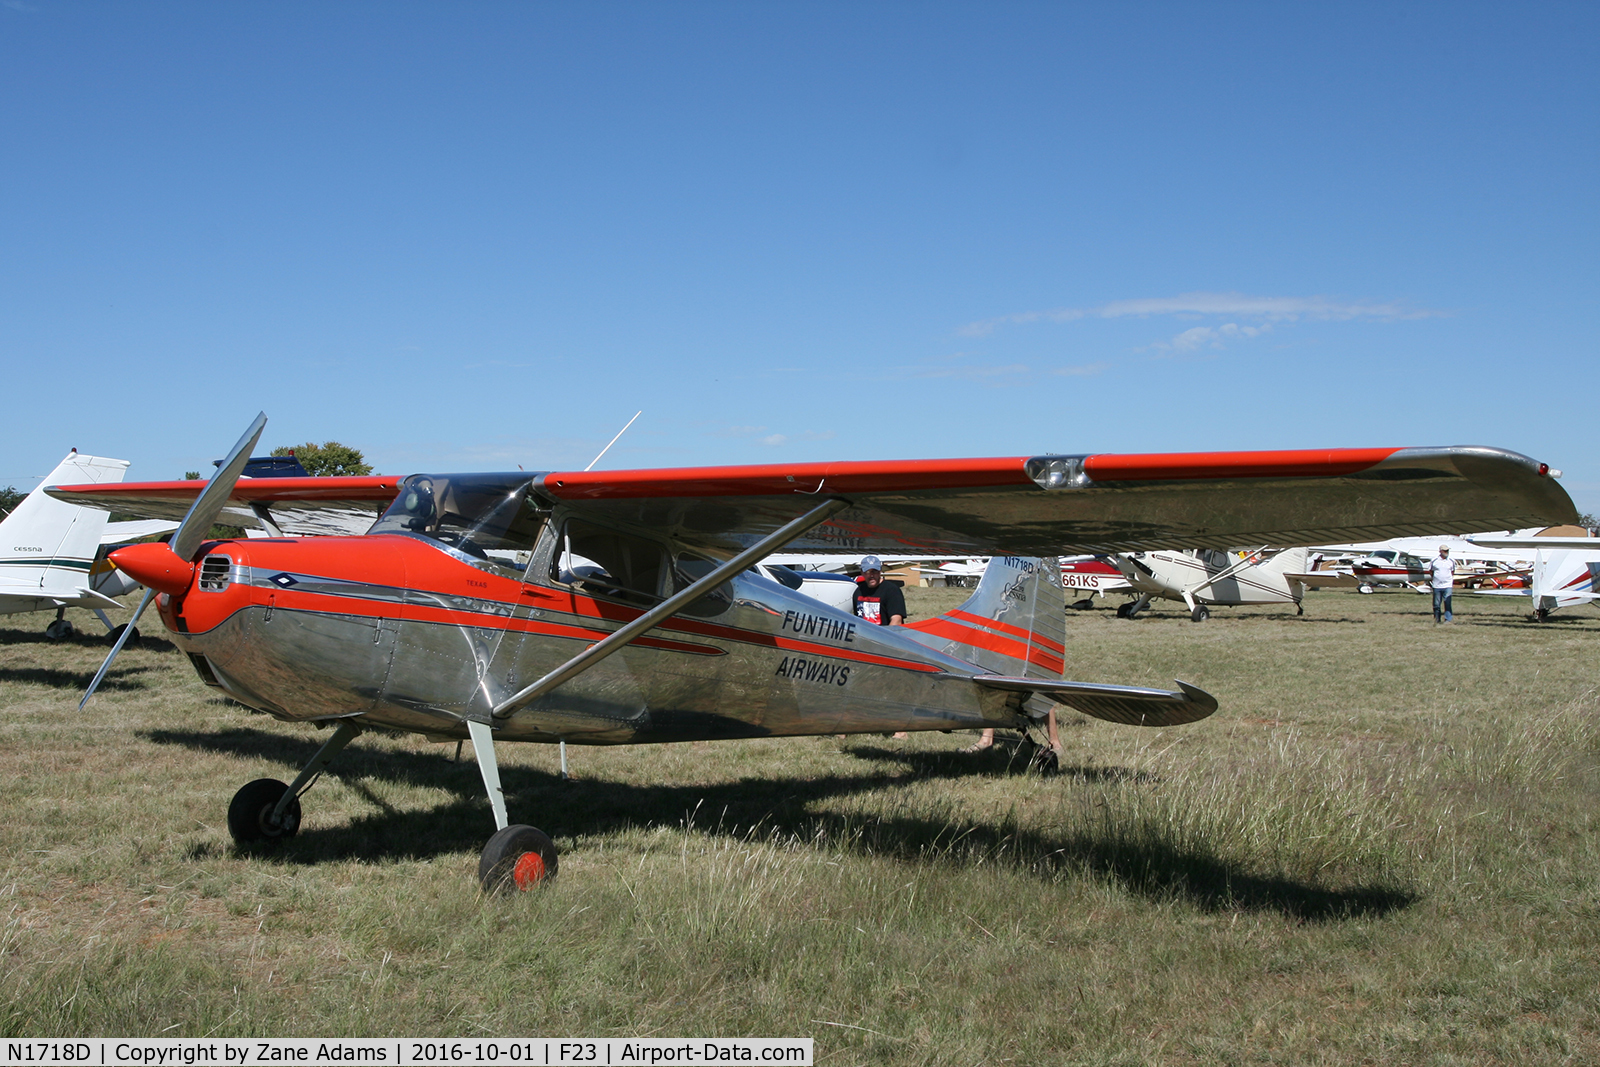 N1718D, 1951 Cessna 170A C/N 20161, At the 2016 Ranger, Texas Fly-in